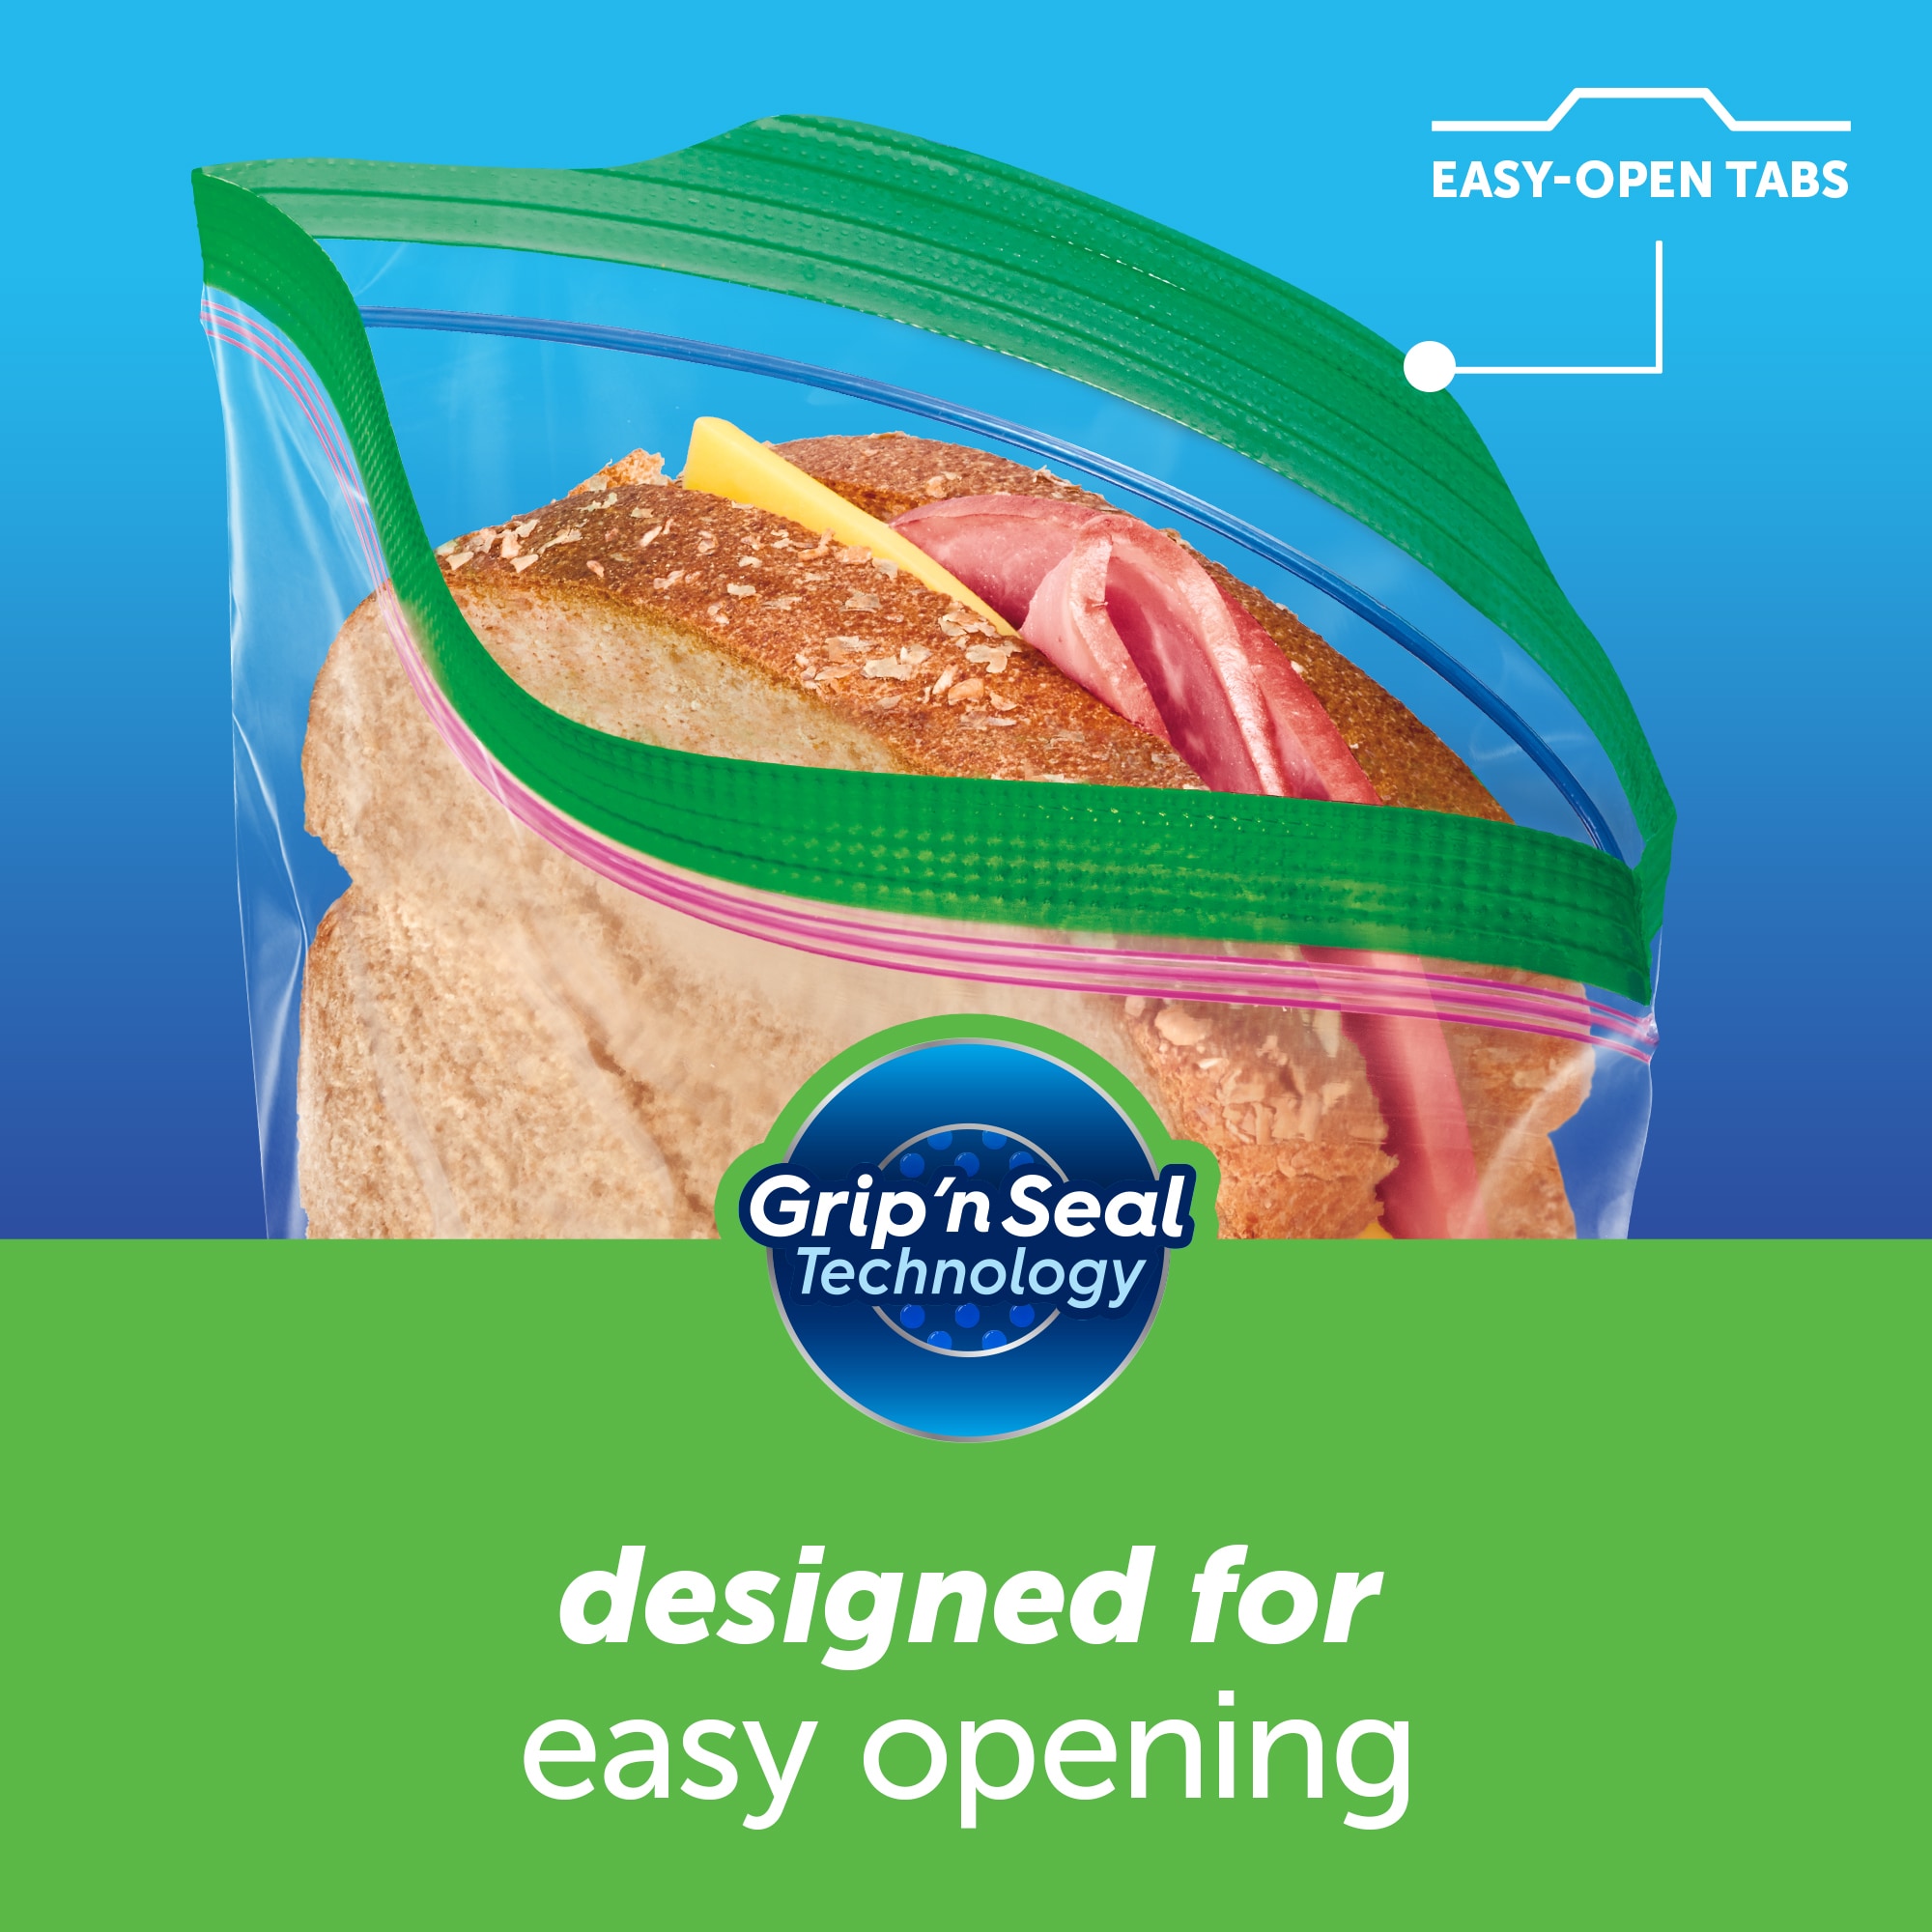 Ziploc Storage Bags with New Grip 'n Seal Technology, for Food, Sandwich,  Organization and More, Quart, 100 Count